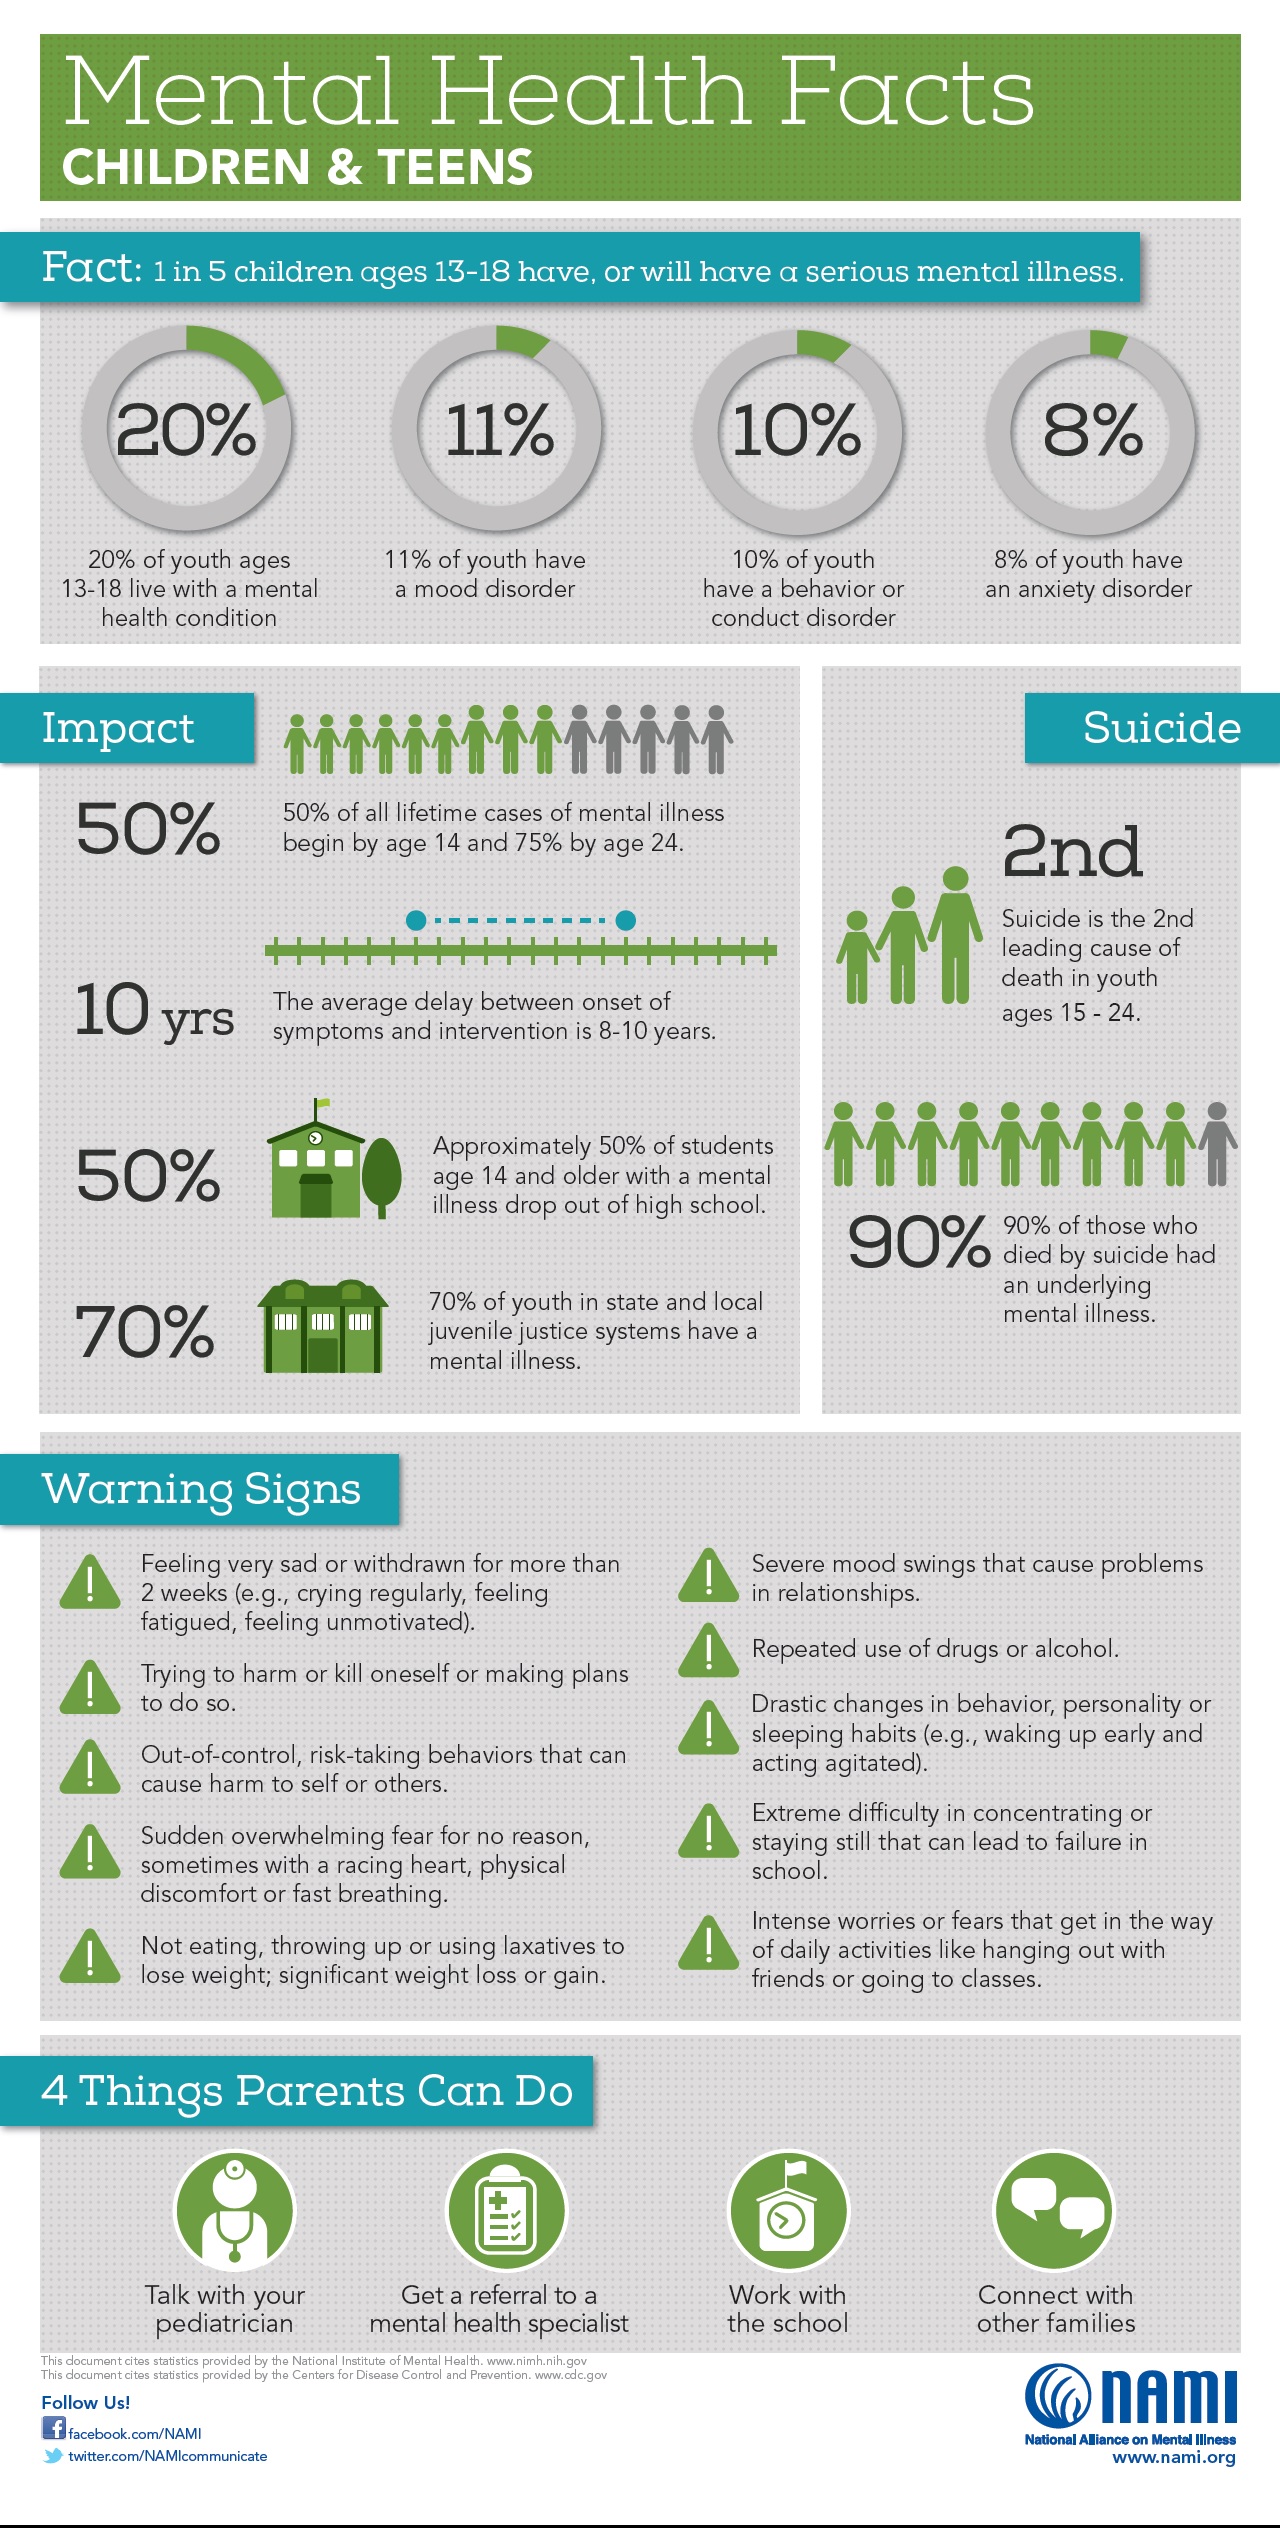 Mental health facts for children and teens